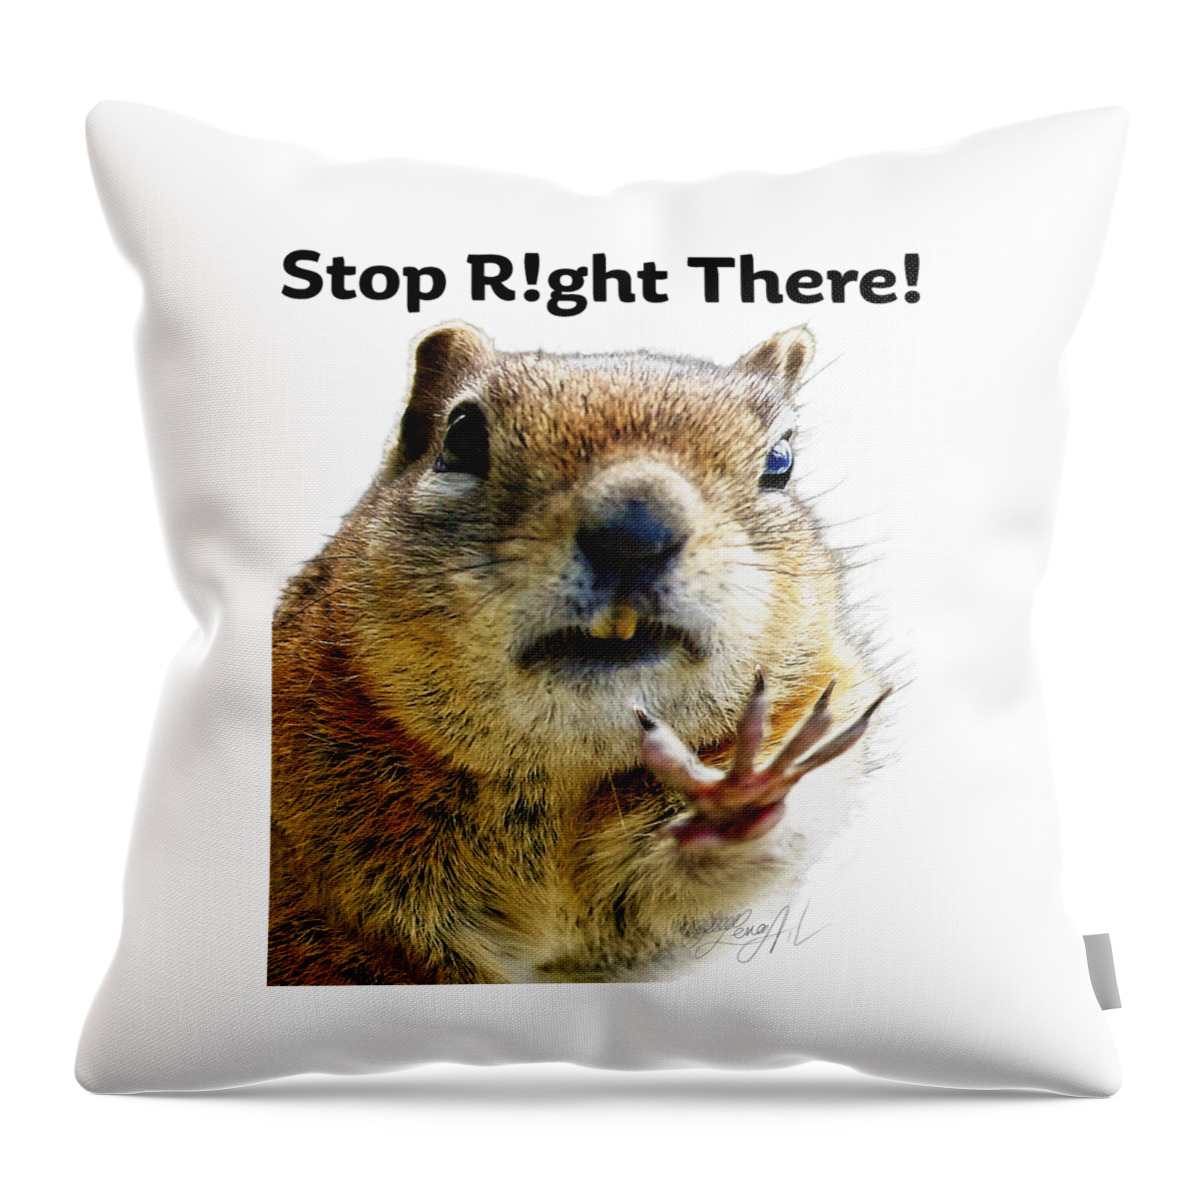 Talk To The Hand Throw Pillow featuring the photograph Stop Right There - Chipmunk Body Language with Typography by Lena Owens - OLena Art Vibrant Palette Knife and Graphic Design